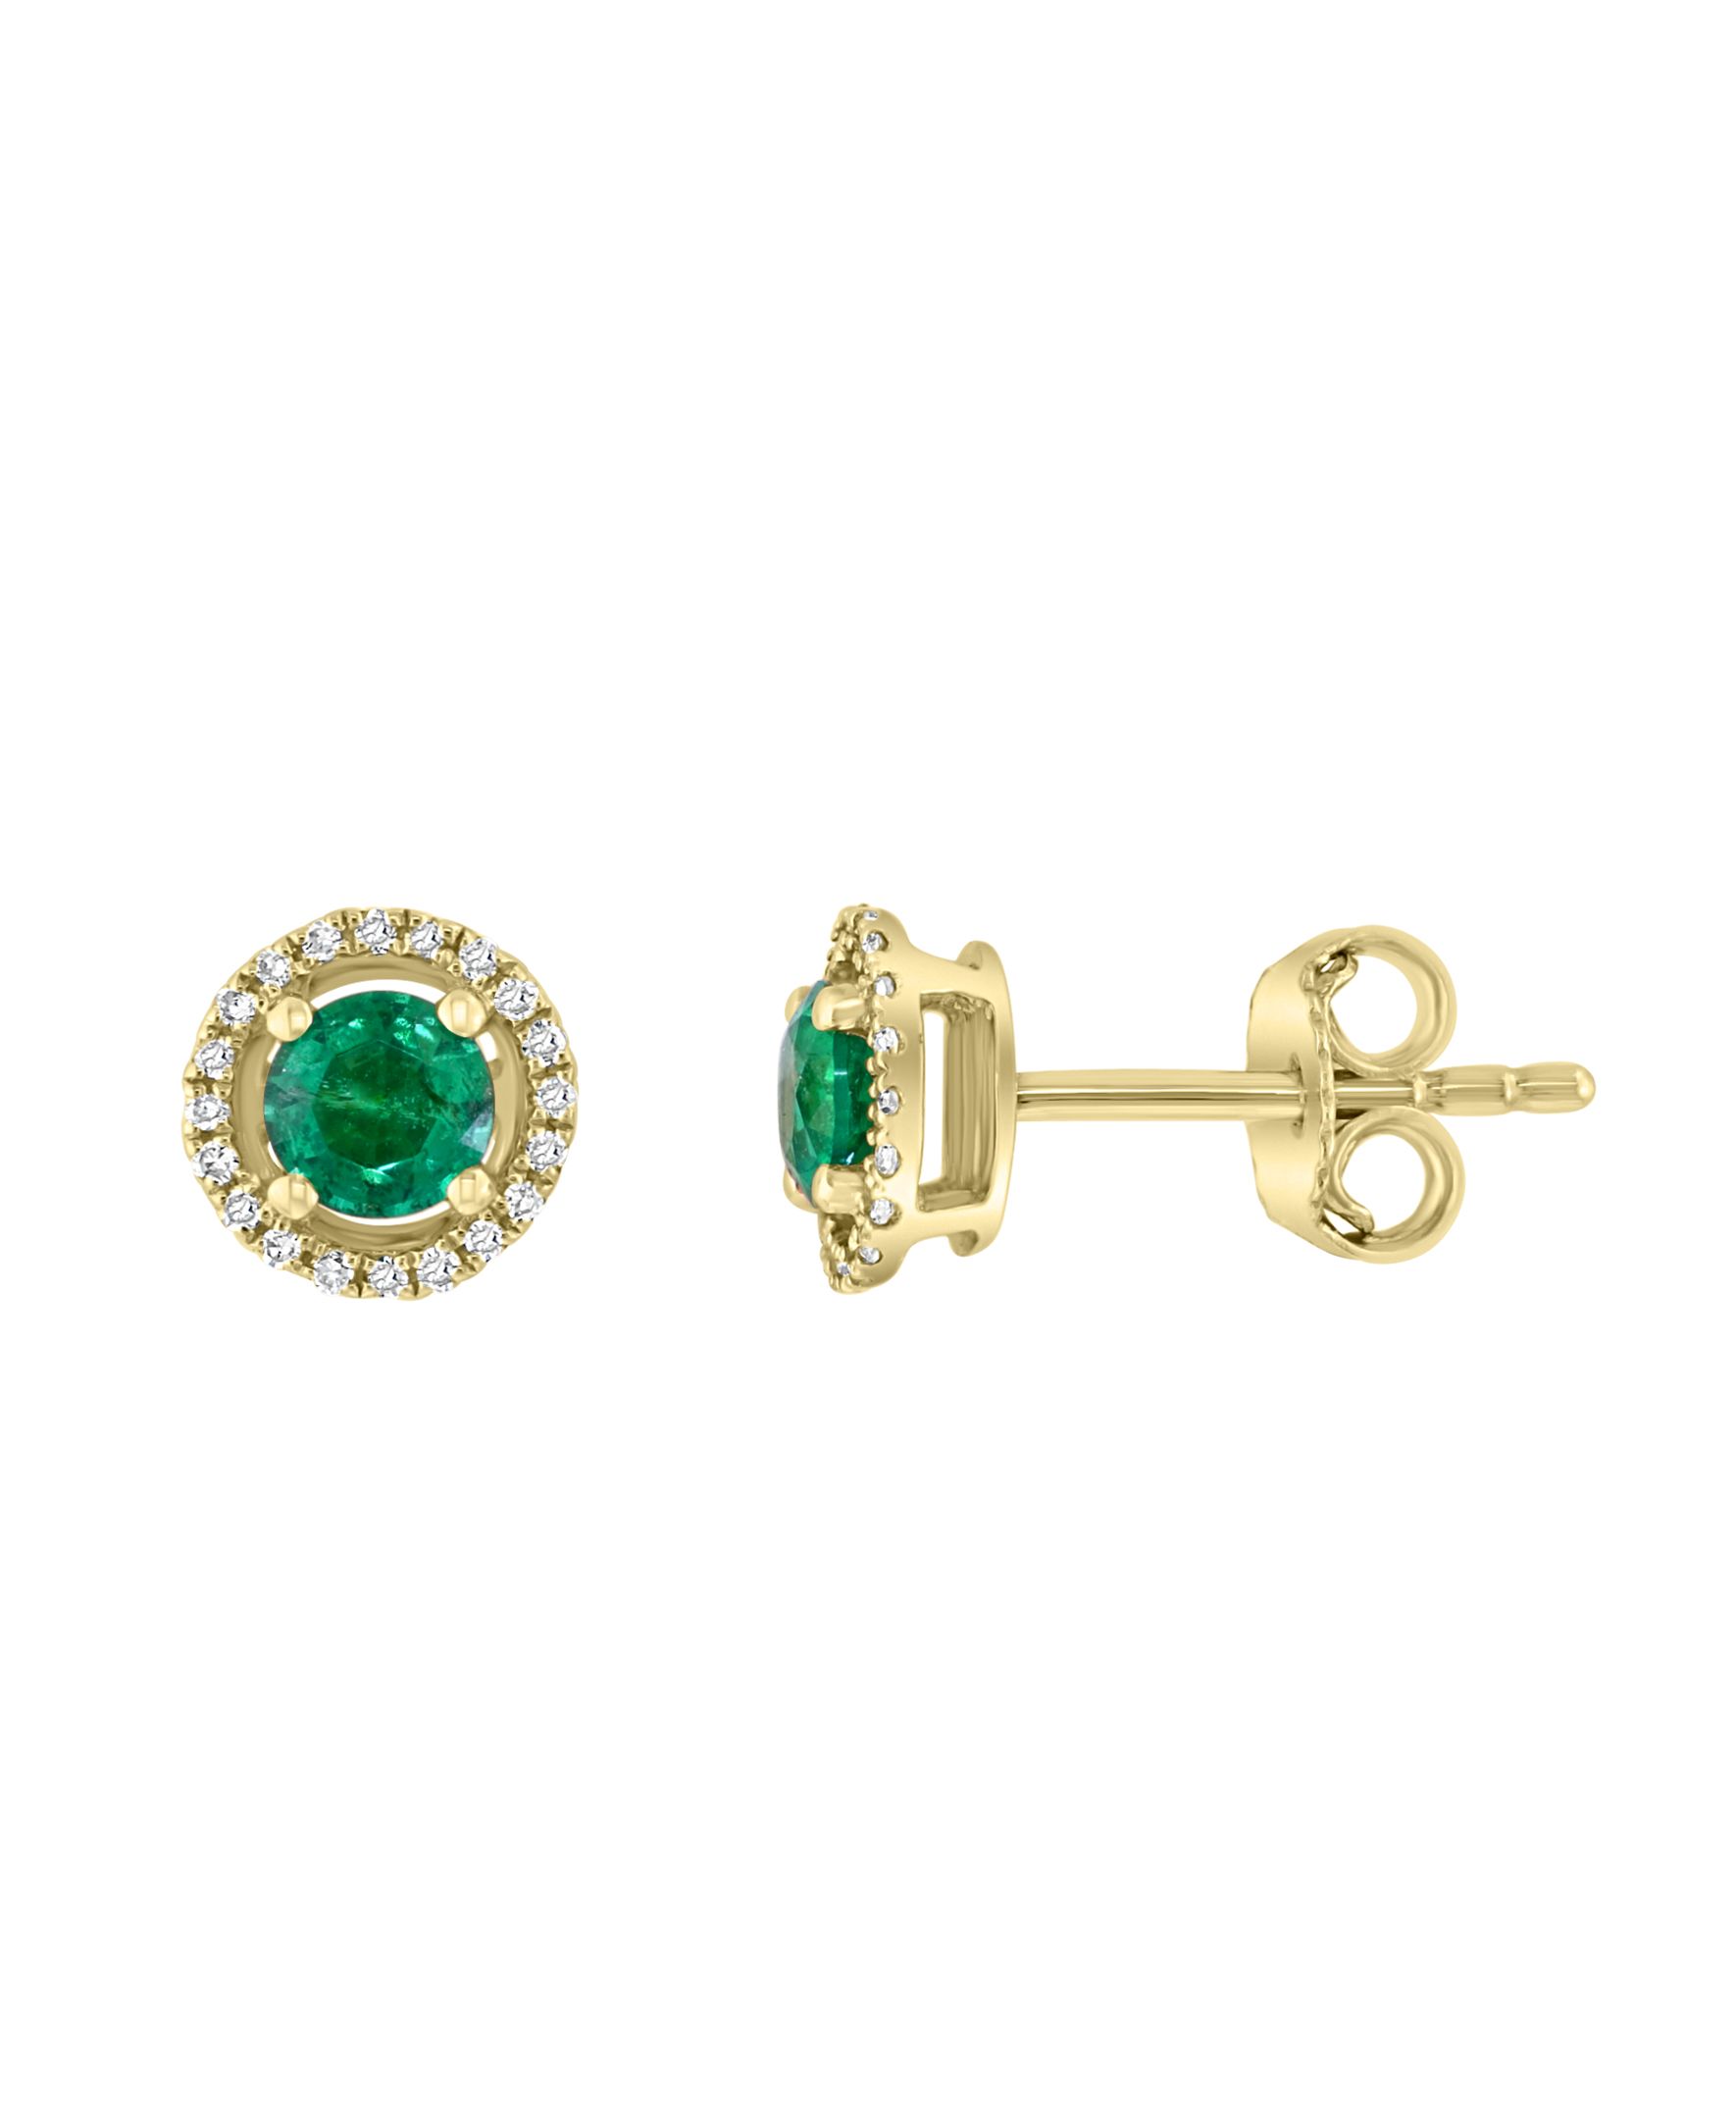 Golden Round Natural Green Emerald Gemstone Studs In Silver Gold Plated  Earrings